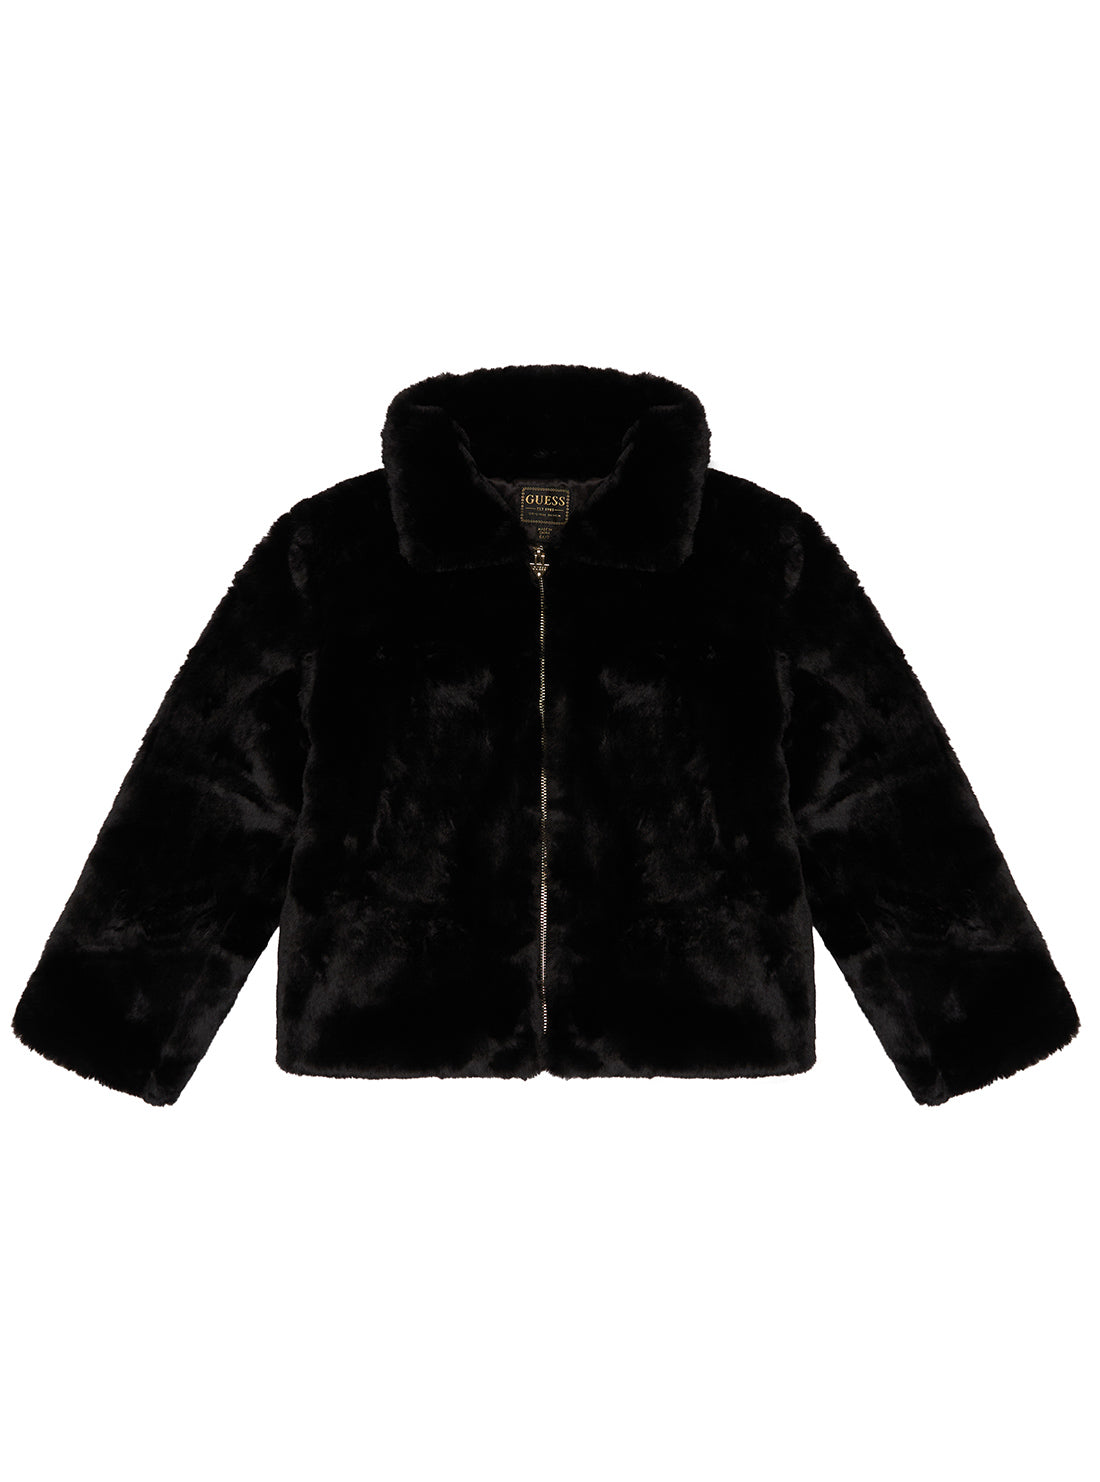 GUESS Black Faux Fur Long Sleeves Jacket (2-7) front view